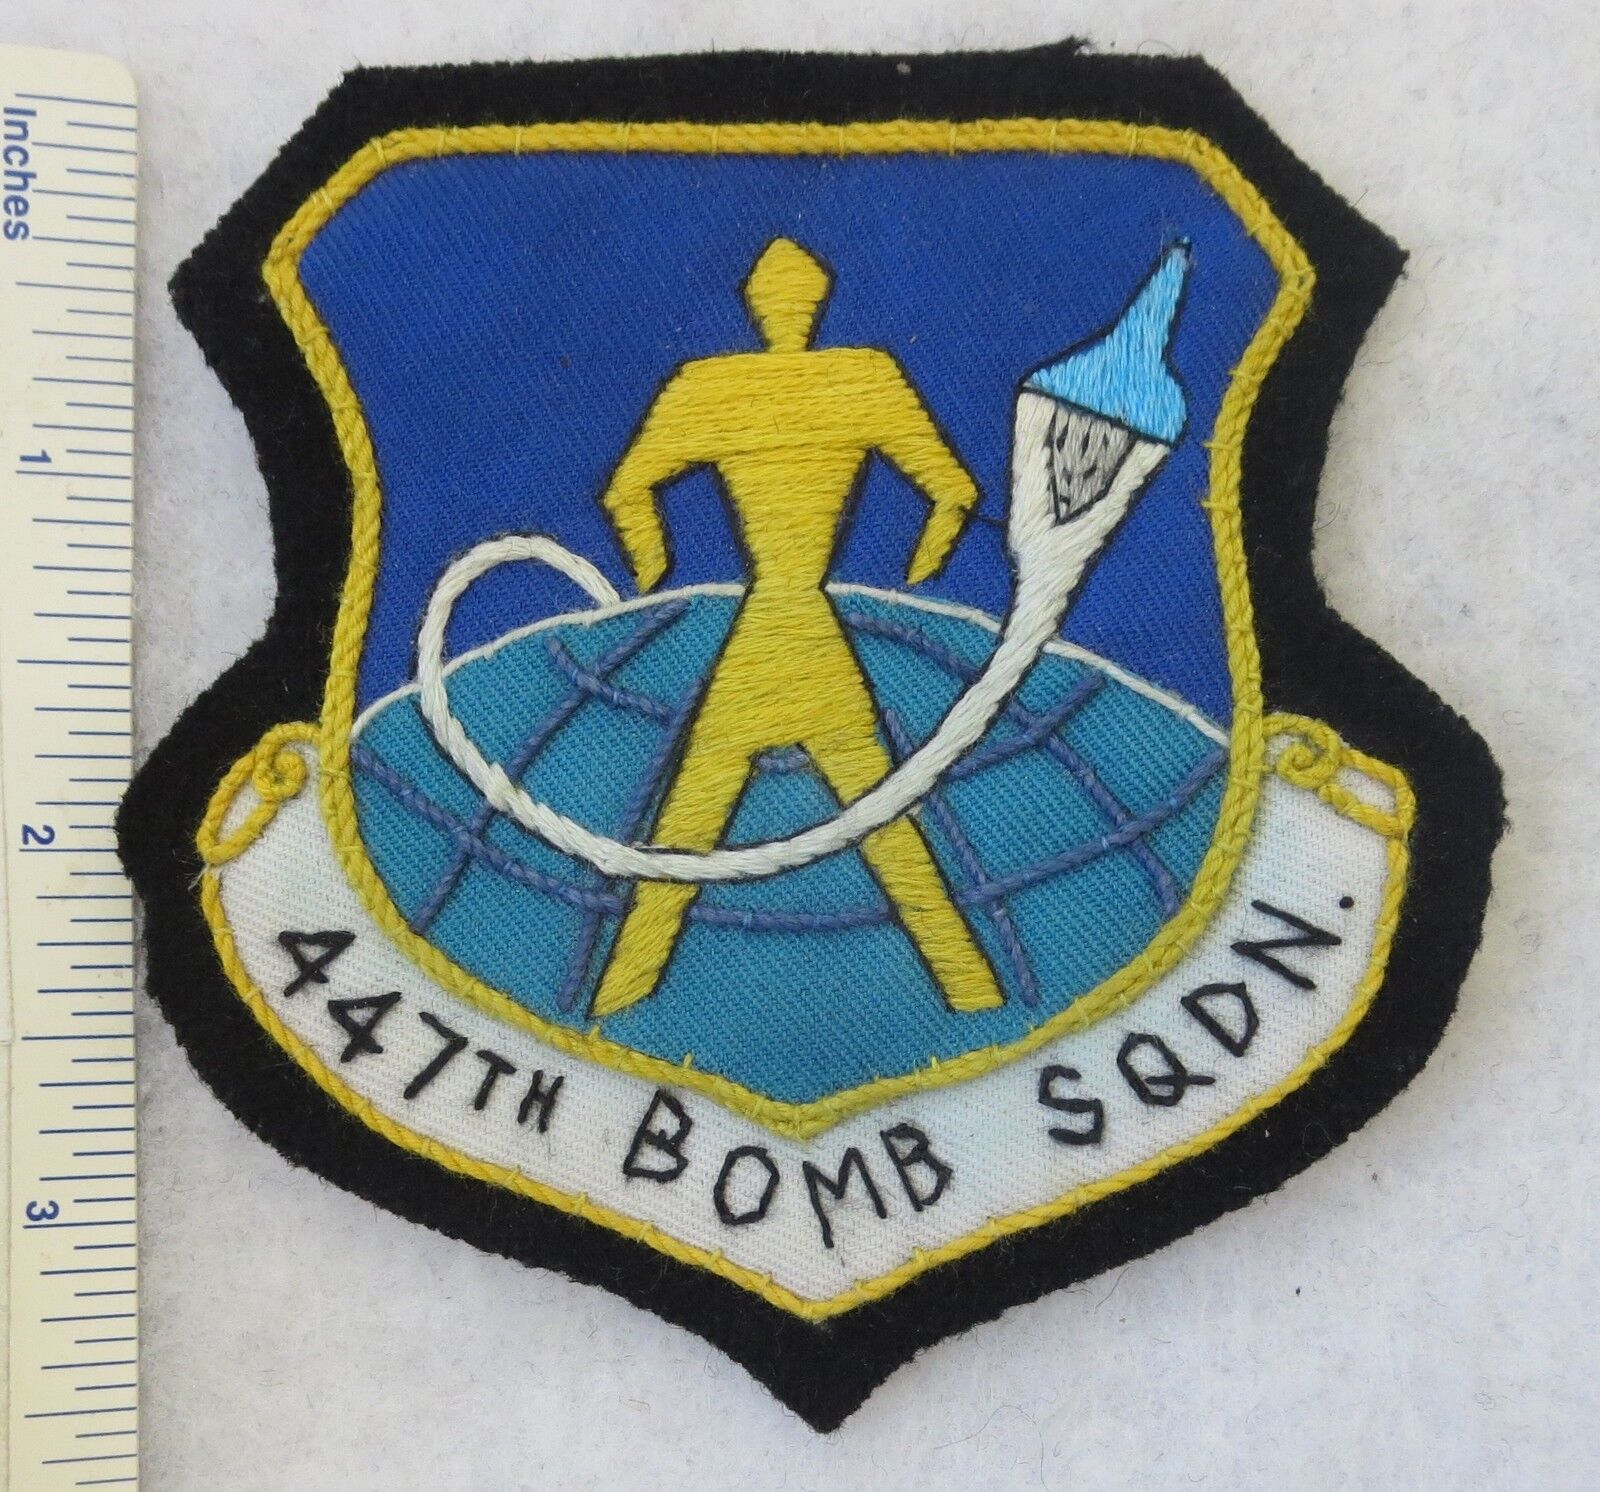 447th BOMB SQUADRON USAF PATCH Custom Made for US AIR FORCE VETERANS